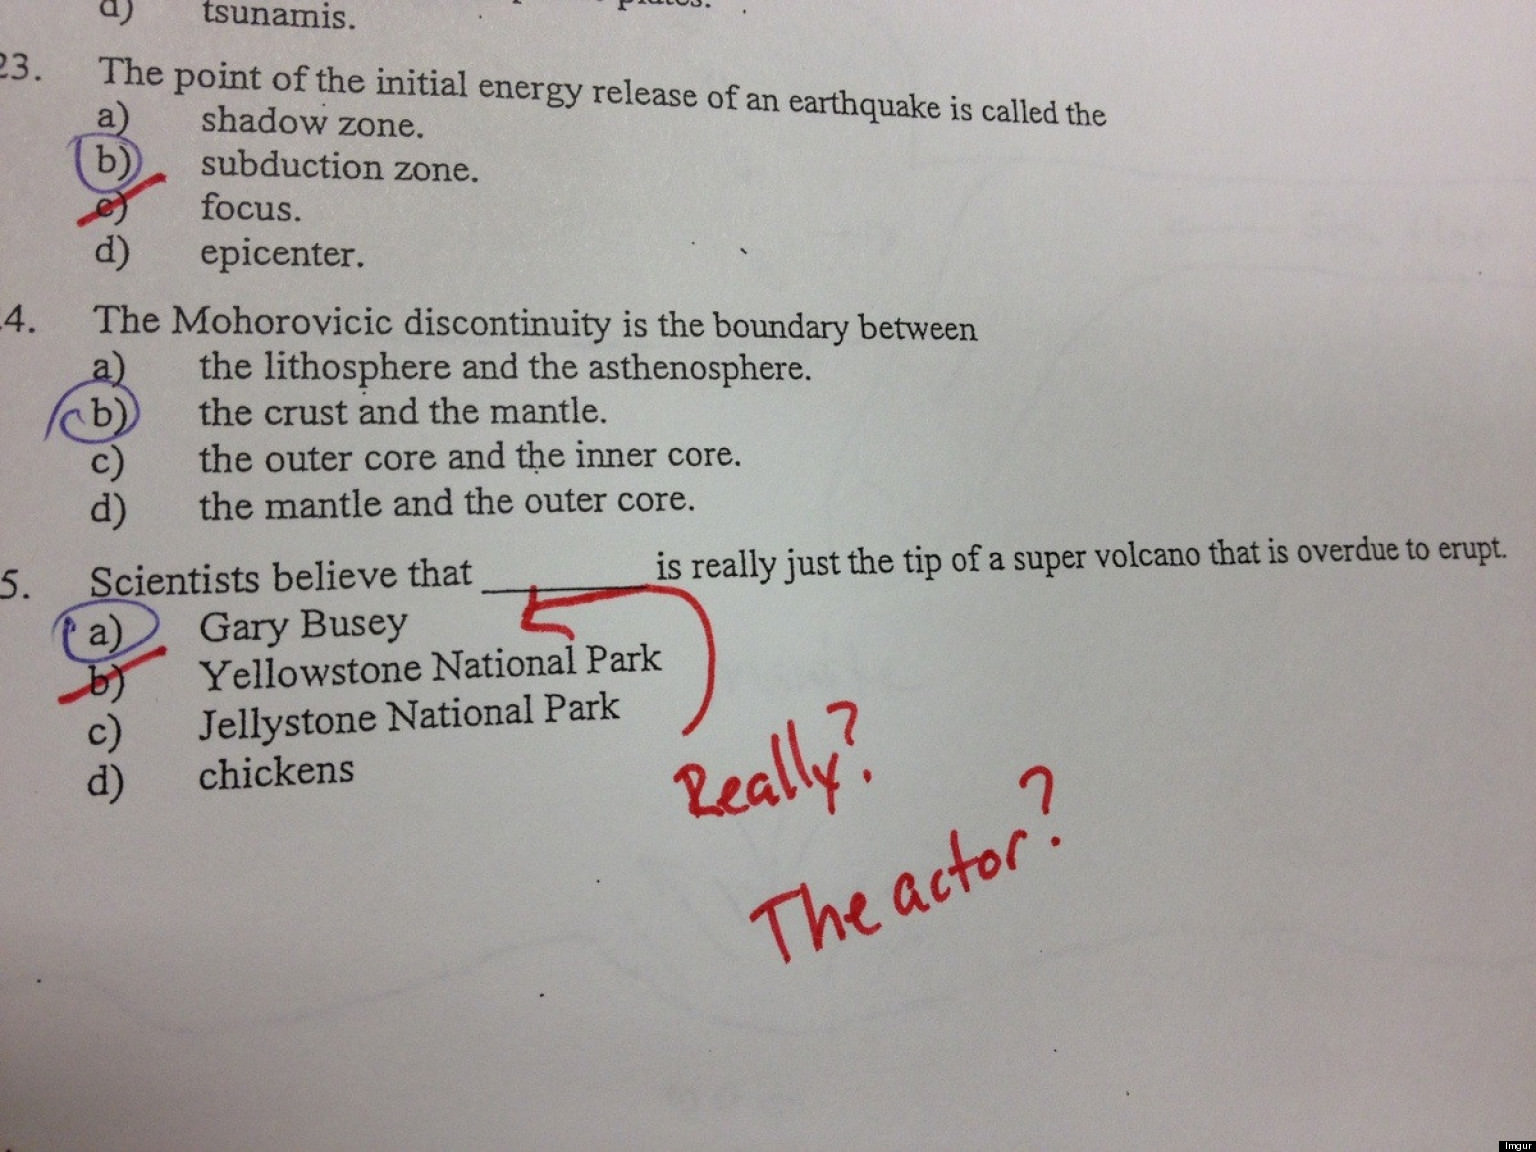 19 Quality Exam Fails That Will Leave You Speechless